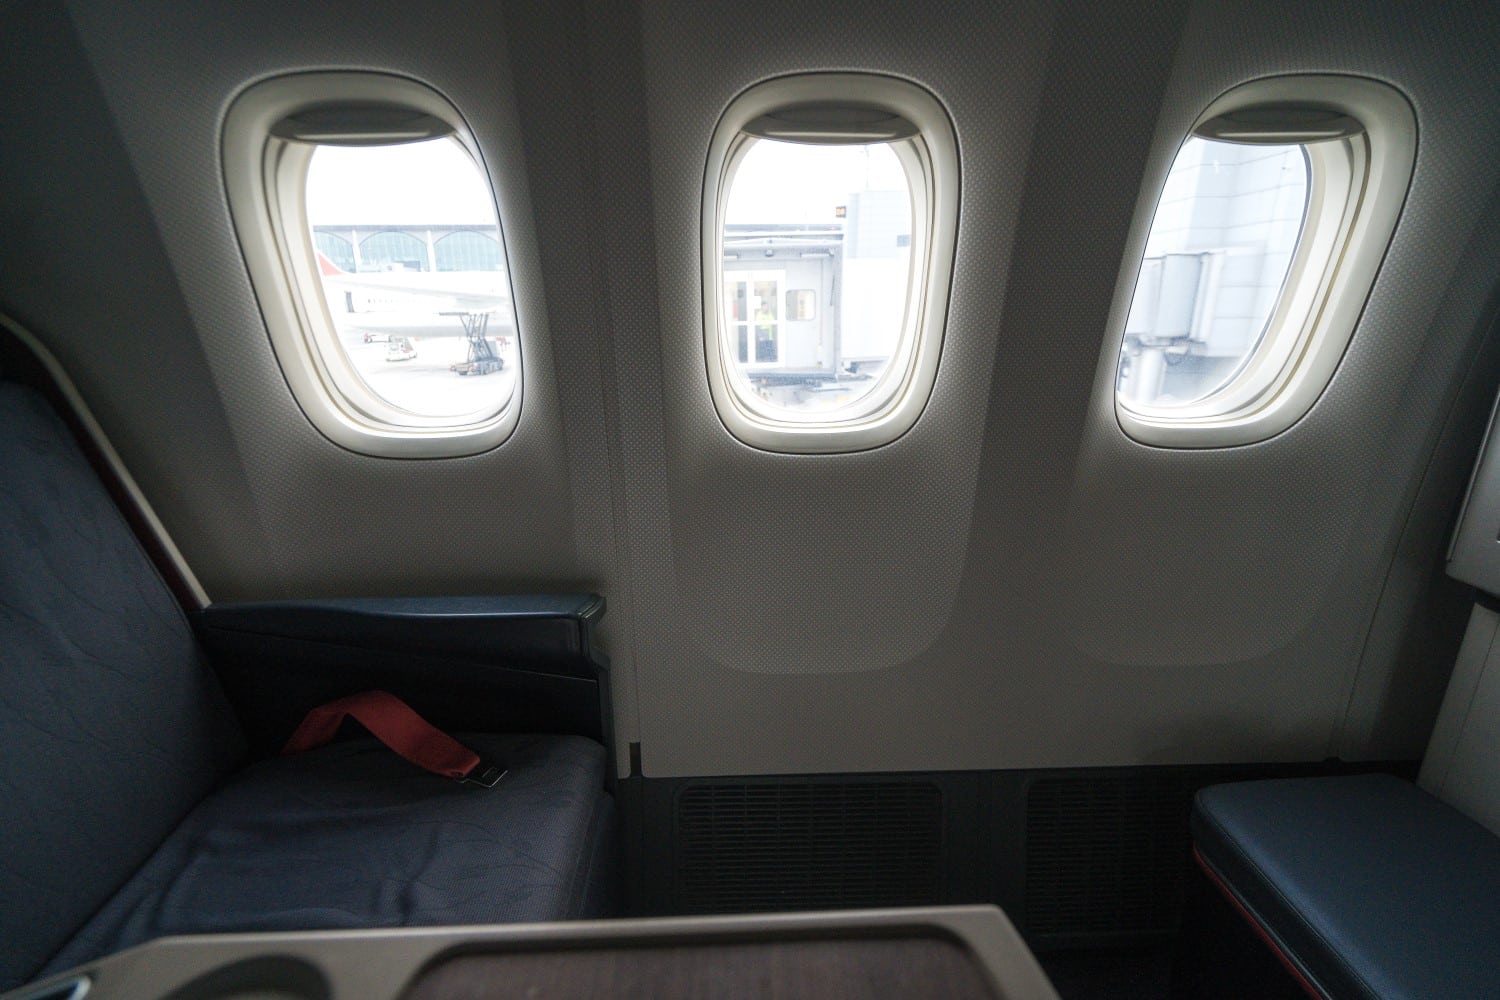 Turkish Airlines 777 business class window seat with three windows.